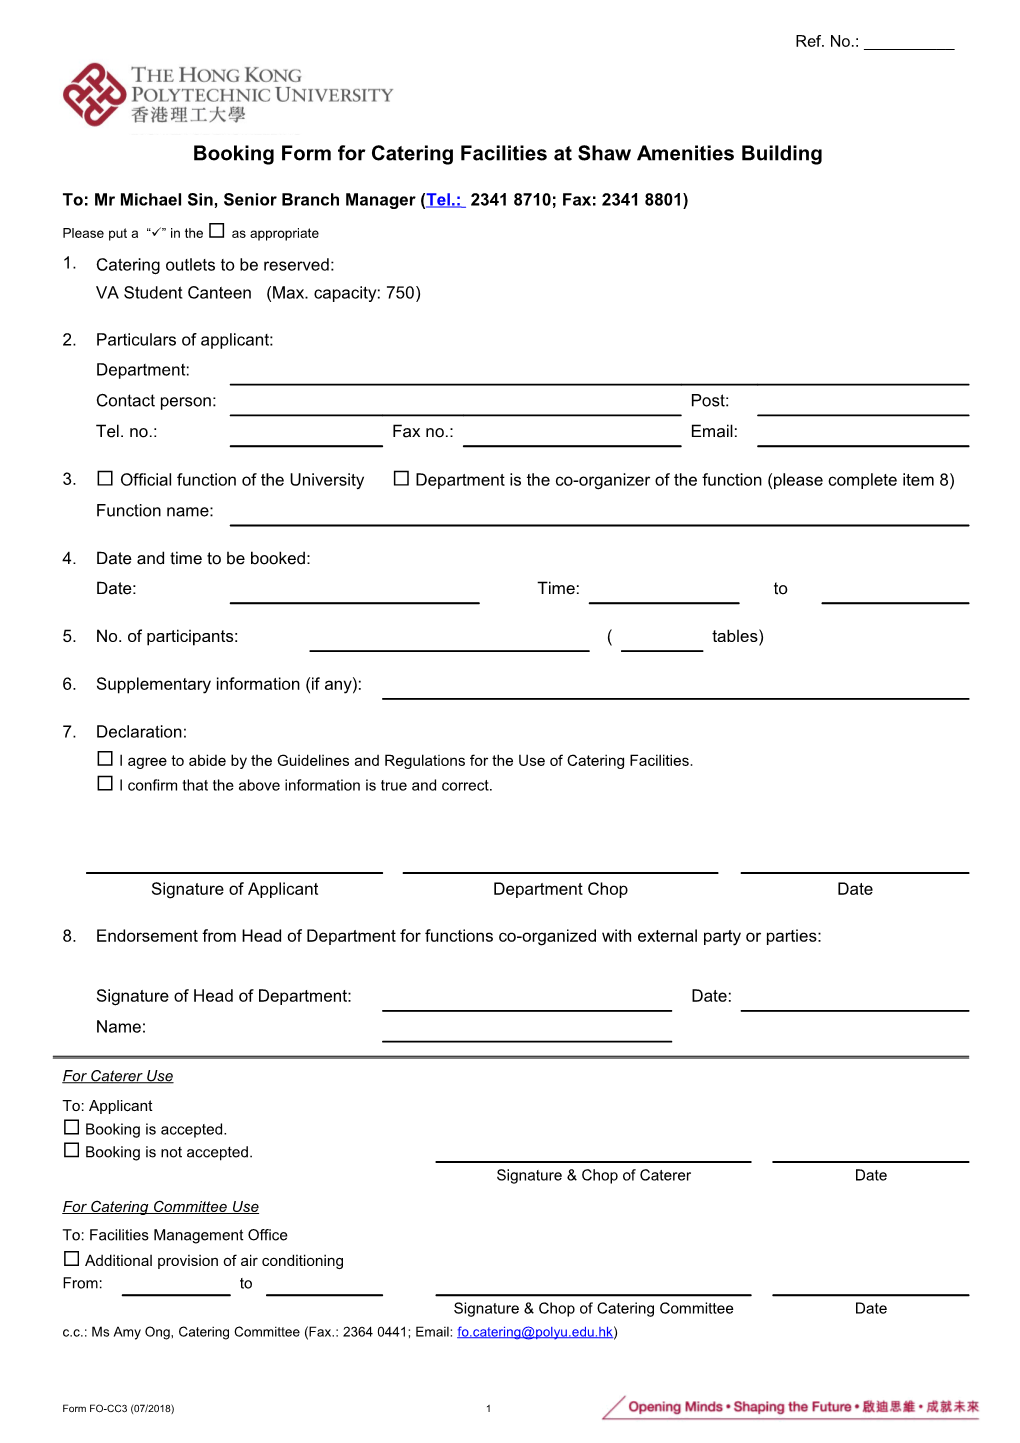 Booking Form for Catering Facilities at Shaw Amenities Building